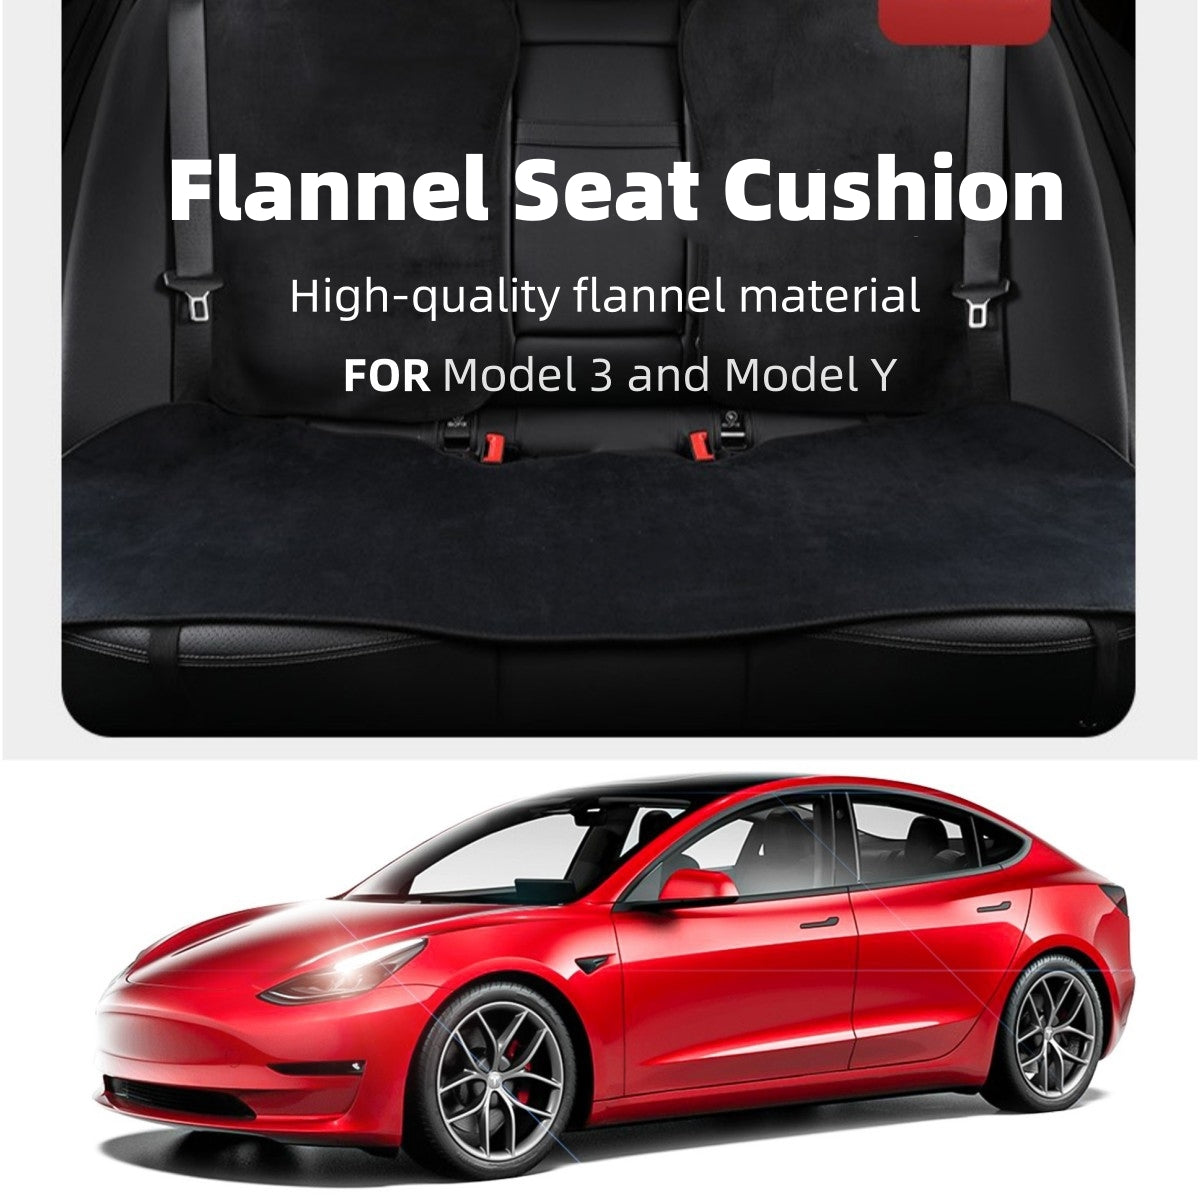 Car Seat Cushion Premium Flannel Fabric Soft and Non-Slip Seat Cover for Tesla Model 3/Y New Model 3 Highland